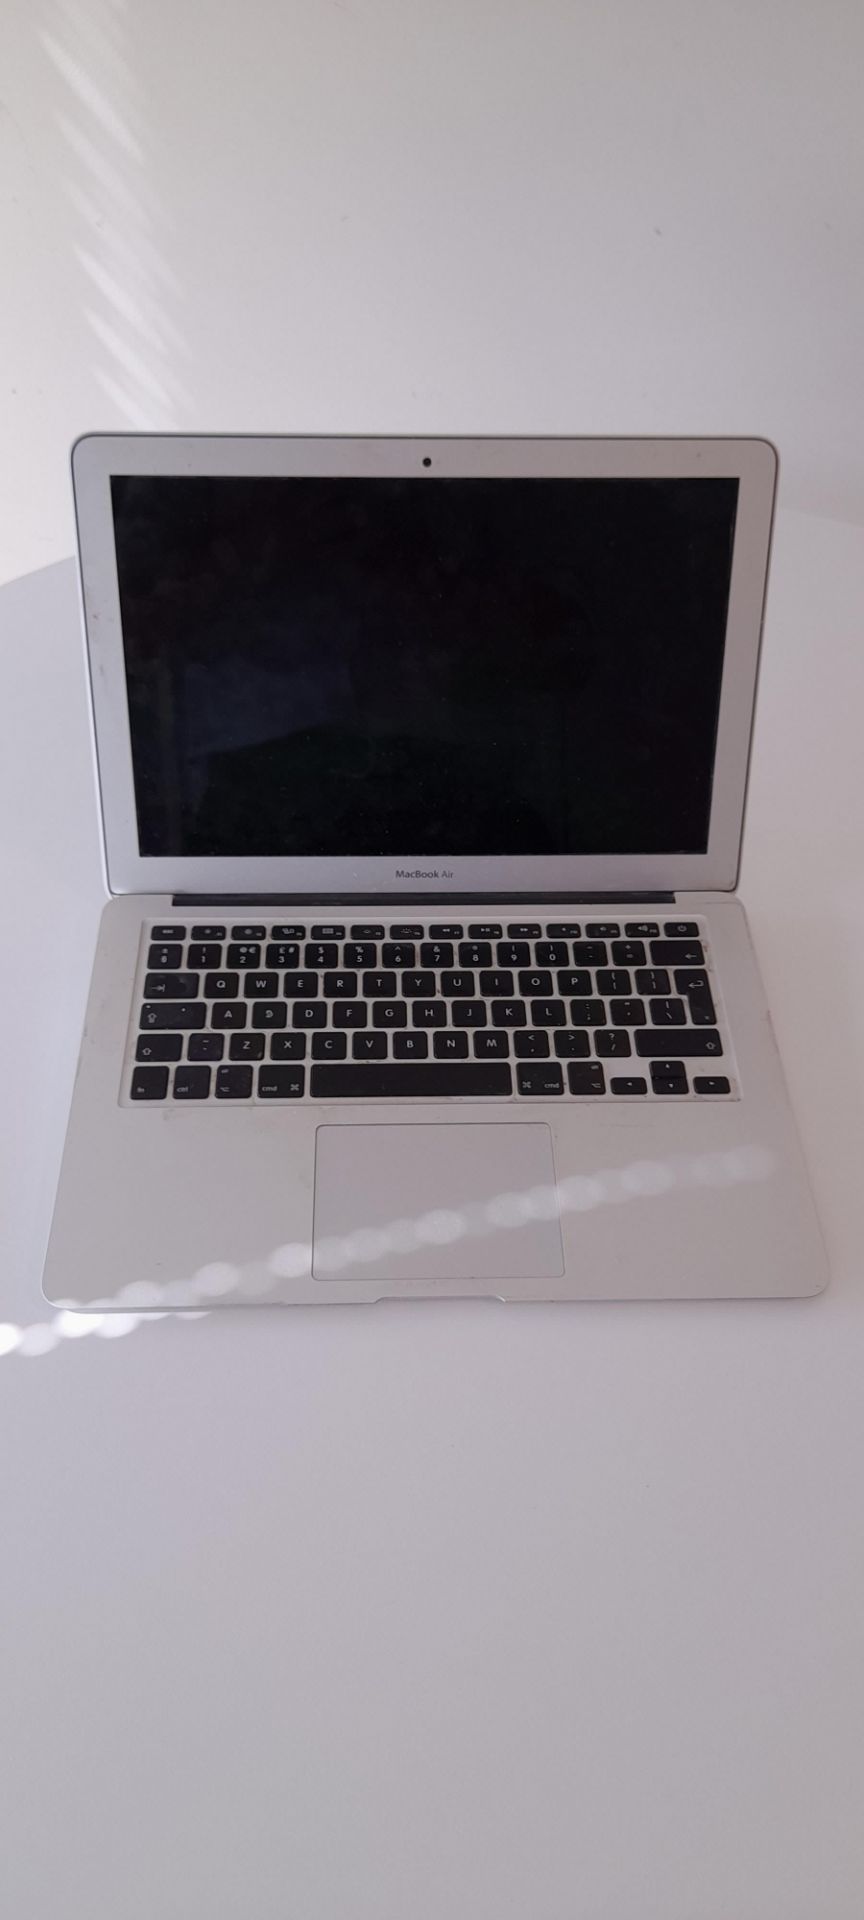 Apple MacBook Air Model A1466 EMC 3178. S/N FVFZ3UM7J1WK. Collection from Canary Wharf, London, E14 - Image 2 of 6